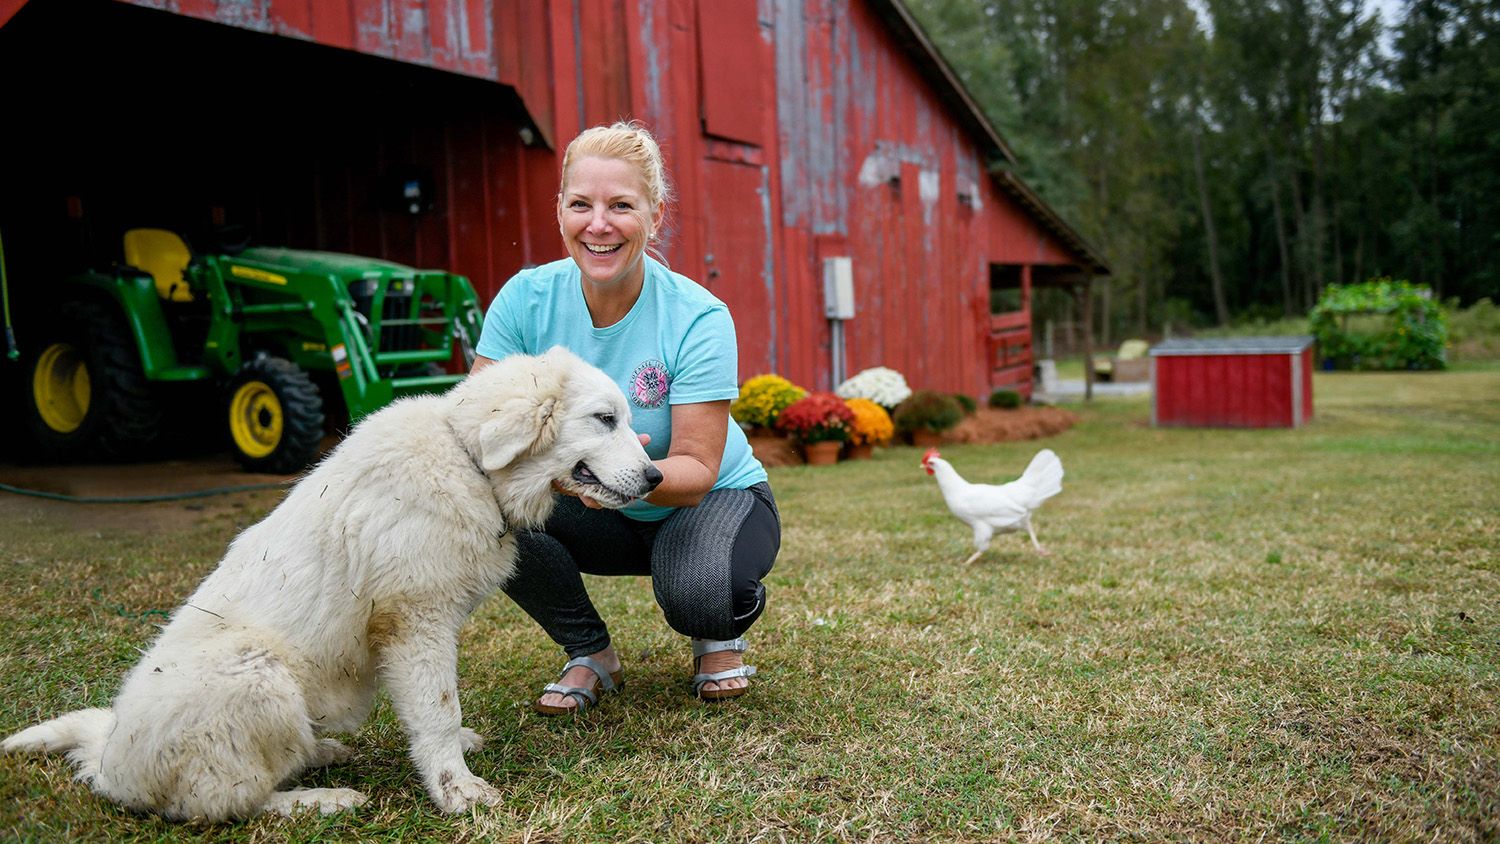 Woman smiling with her hand out to dog. In the background, a big red barn, tractor and chicken.